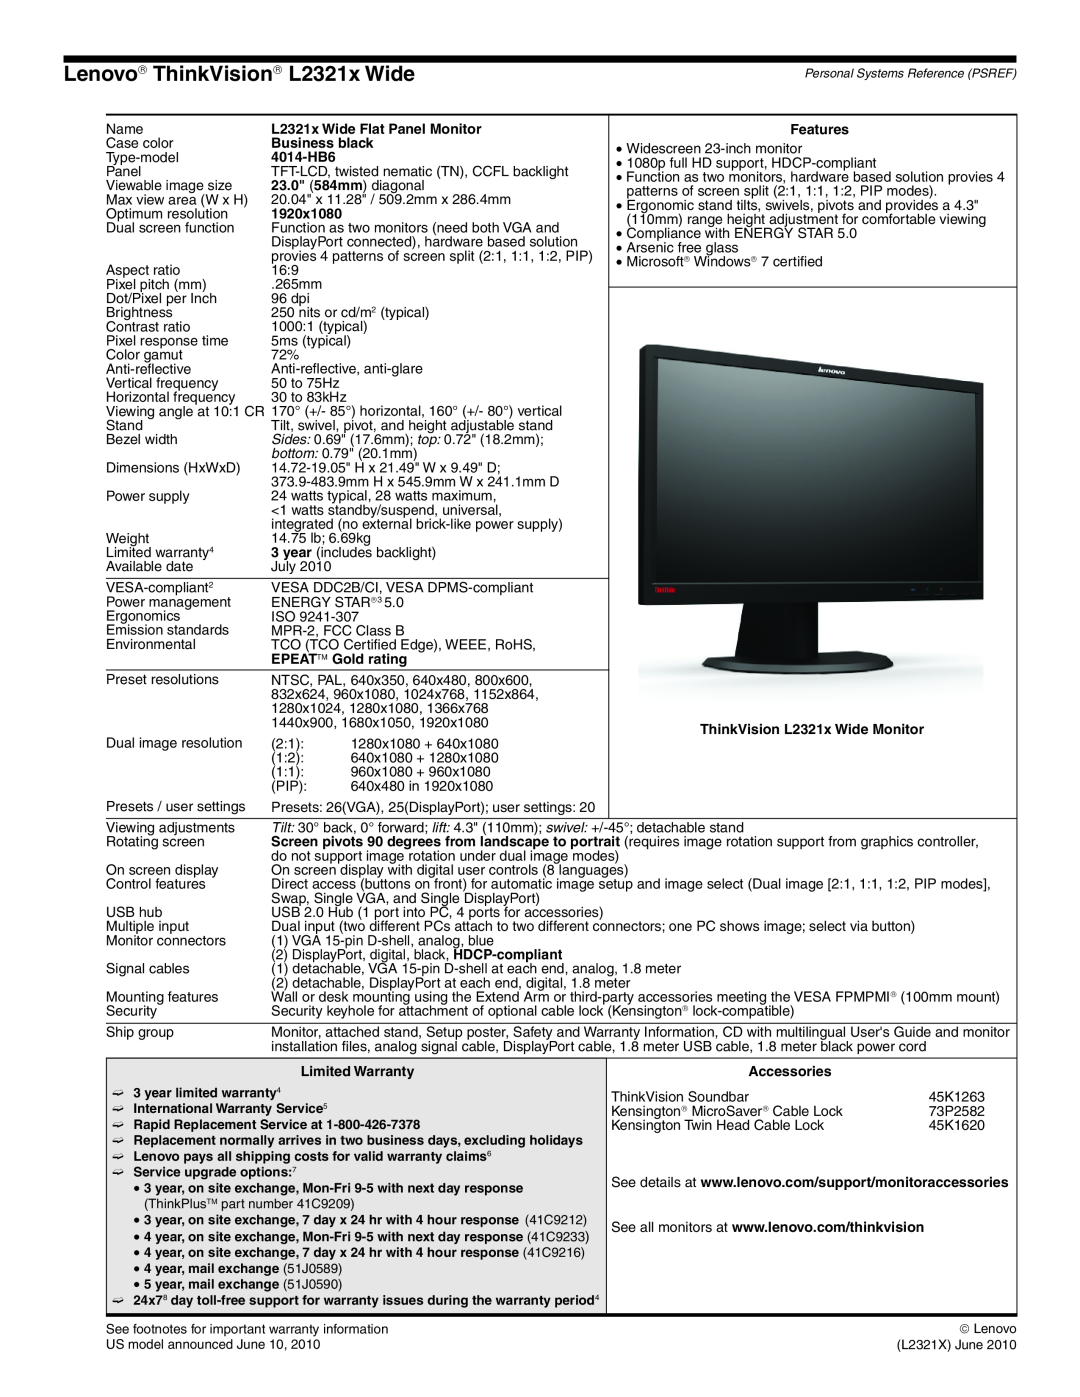 Lenovo manual Lenovo→ ThinkVision→ L2321x Wide, L2321x Wide Flat Panel Monitor, 4014-HB6, 23.0 584mm diagonal, Features 